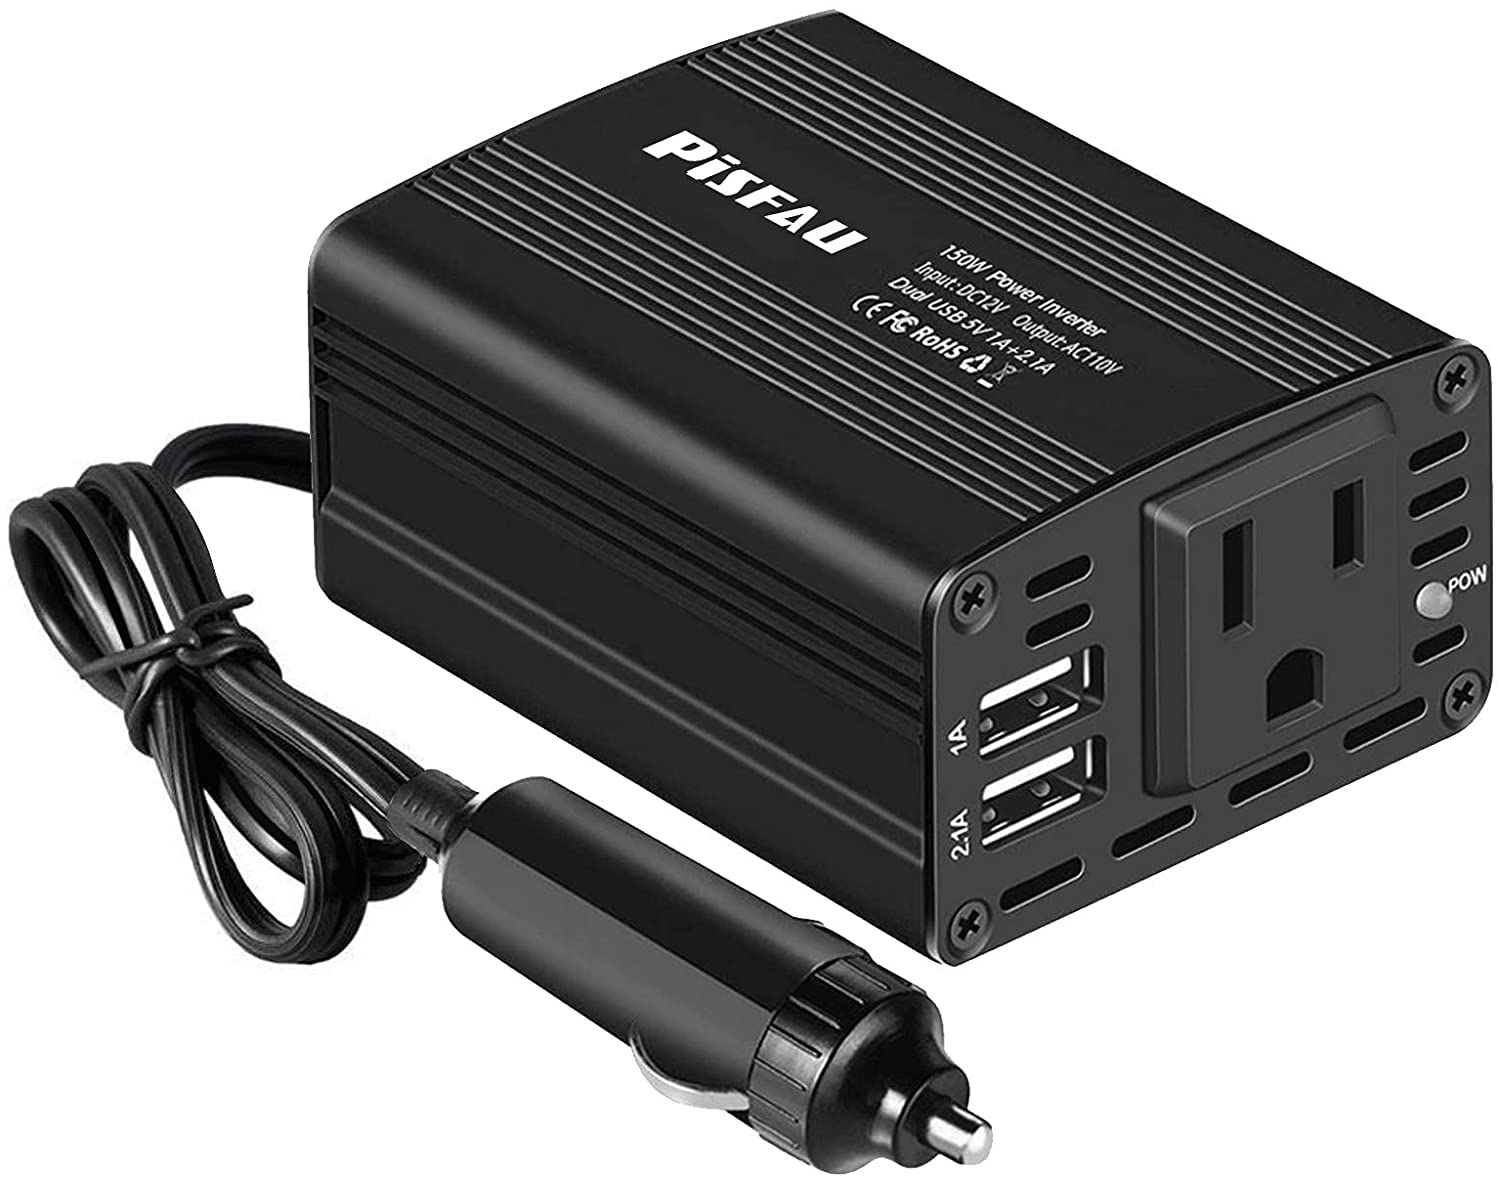 Pisfau 150W Power Inverter 12V DC to 110V AC Car Plug Adapter Outlet Converter with 3.1A Dual USB AC Car Charger for Laptop Computer, Black (MT-MX150)